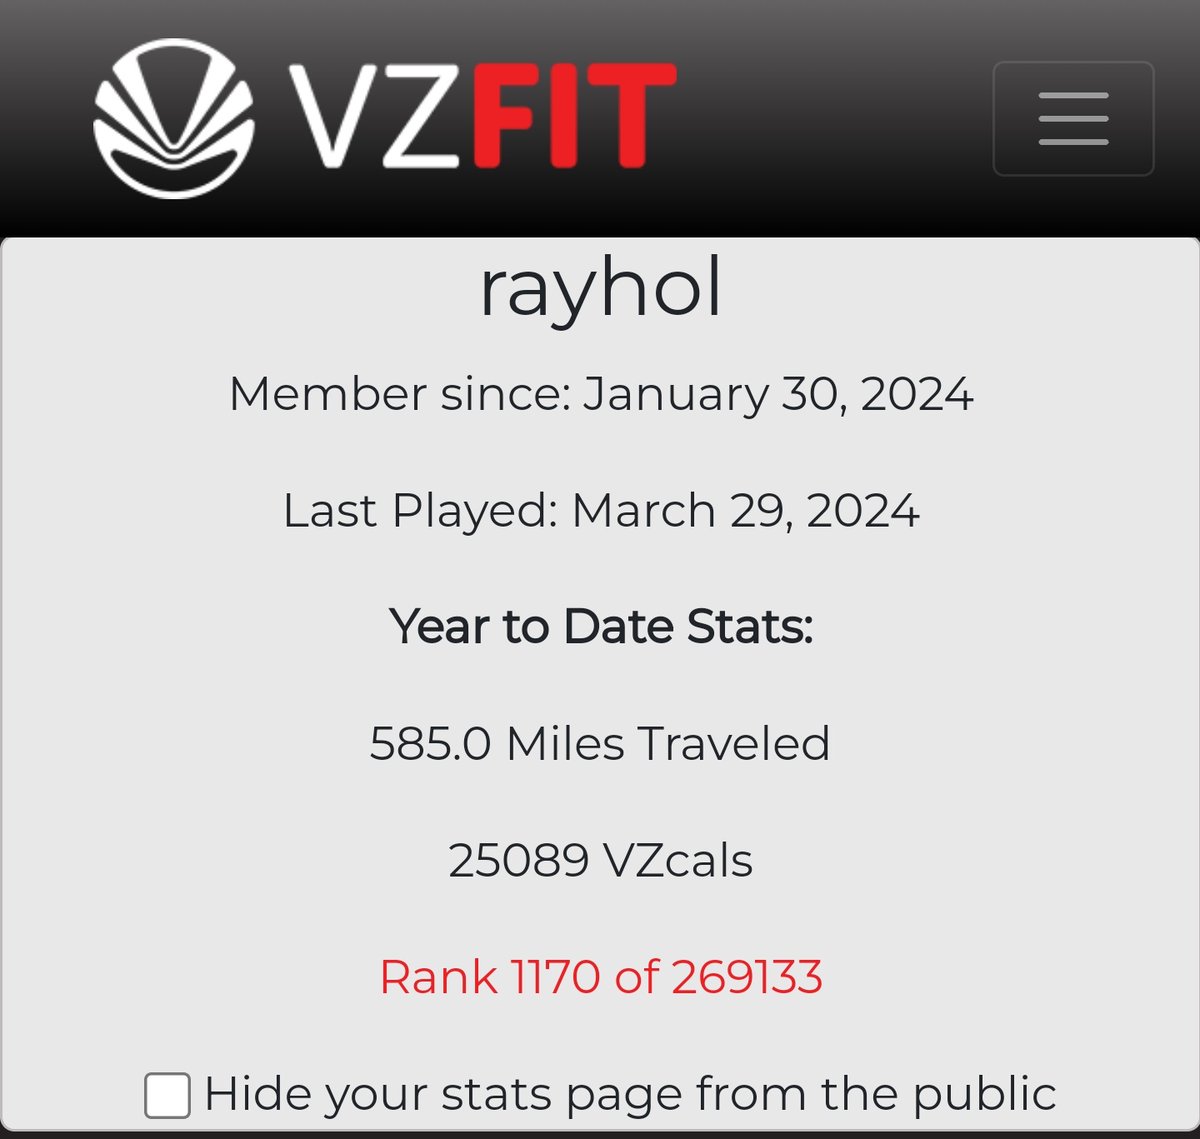 Just under 400 miles cycled in March, nearly doubled February's distance (although I was away for a week). Riding around the world in VZFit VR keeps me motivated by looking forward to seeing places new and old in VR. @VirZOOM #VZfit #VR @MetaQuestVR #Quest3